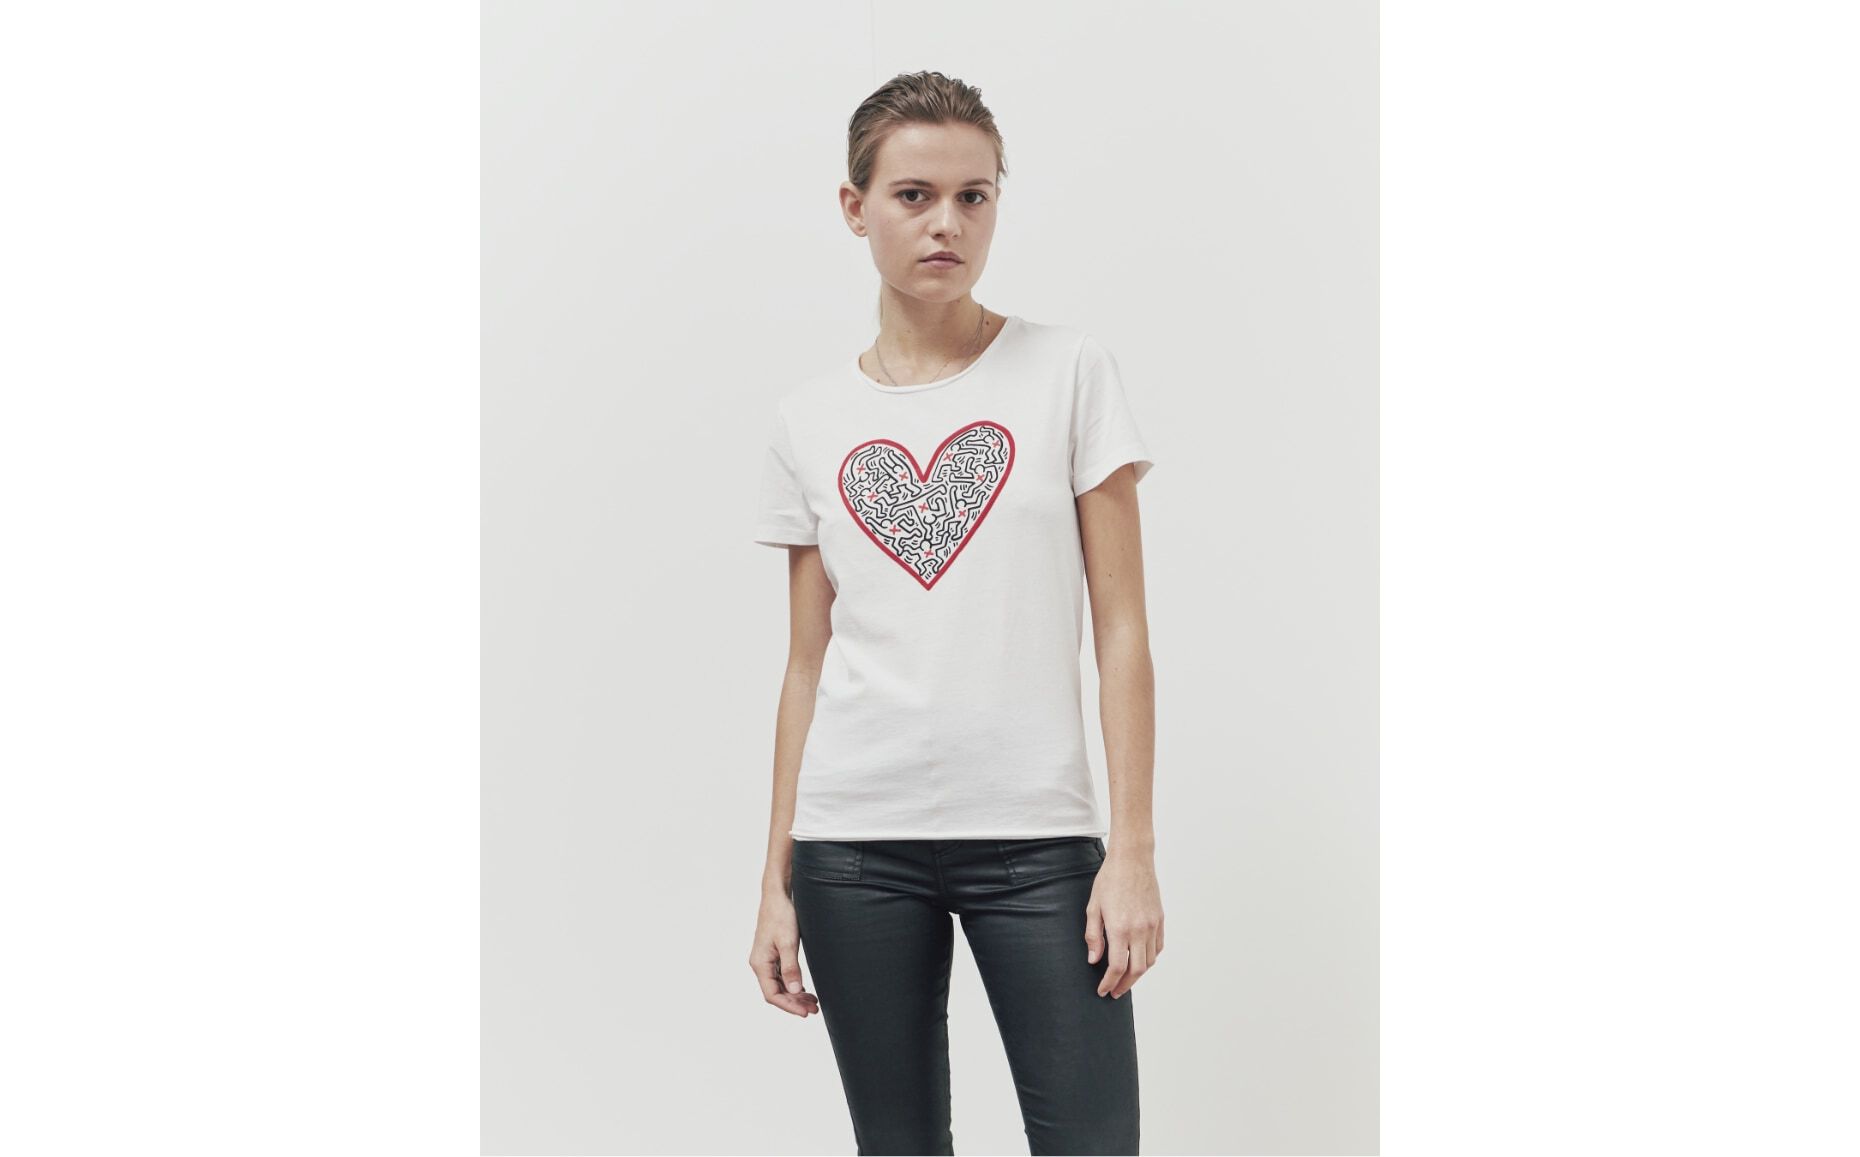 Women’s off-white KEITH HARING x IKKS T-shirt with heart